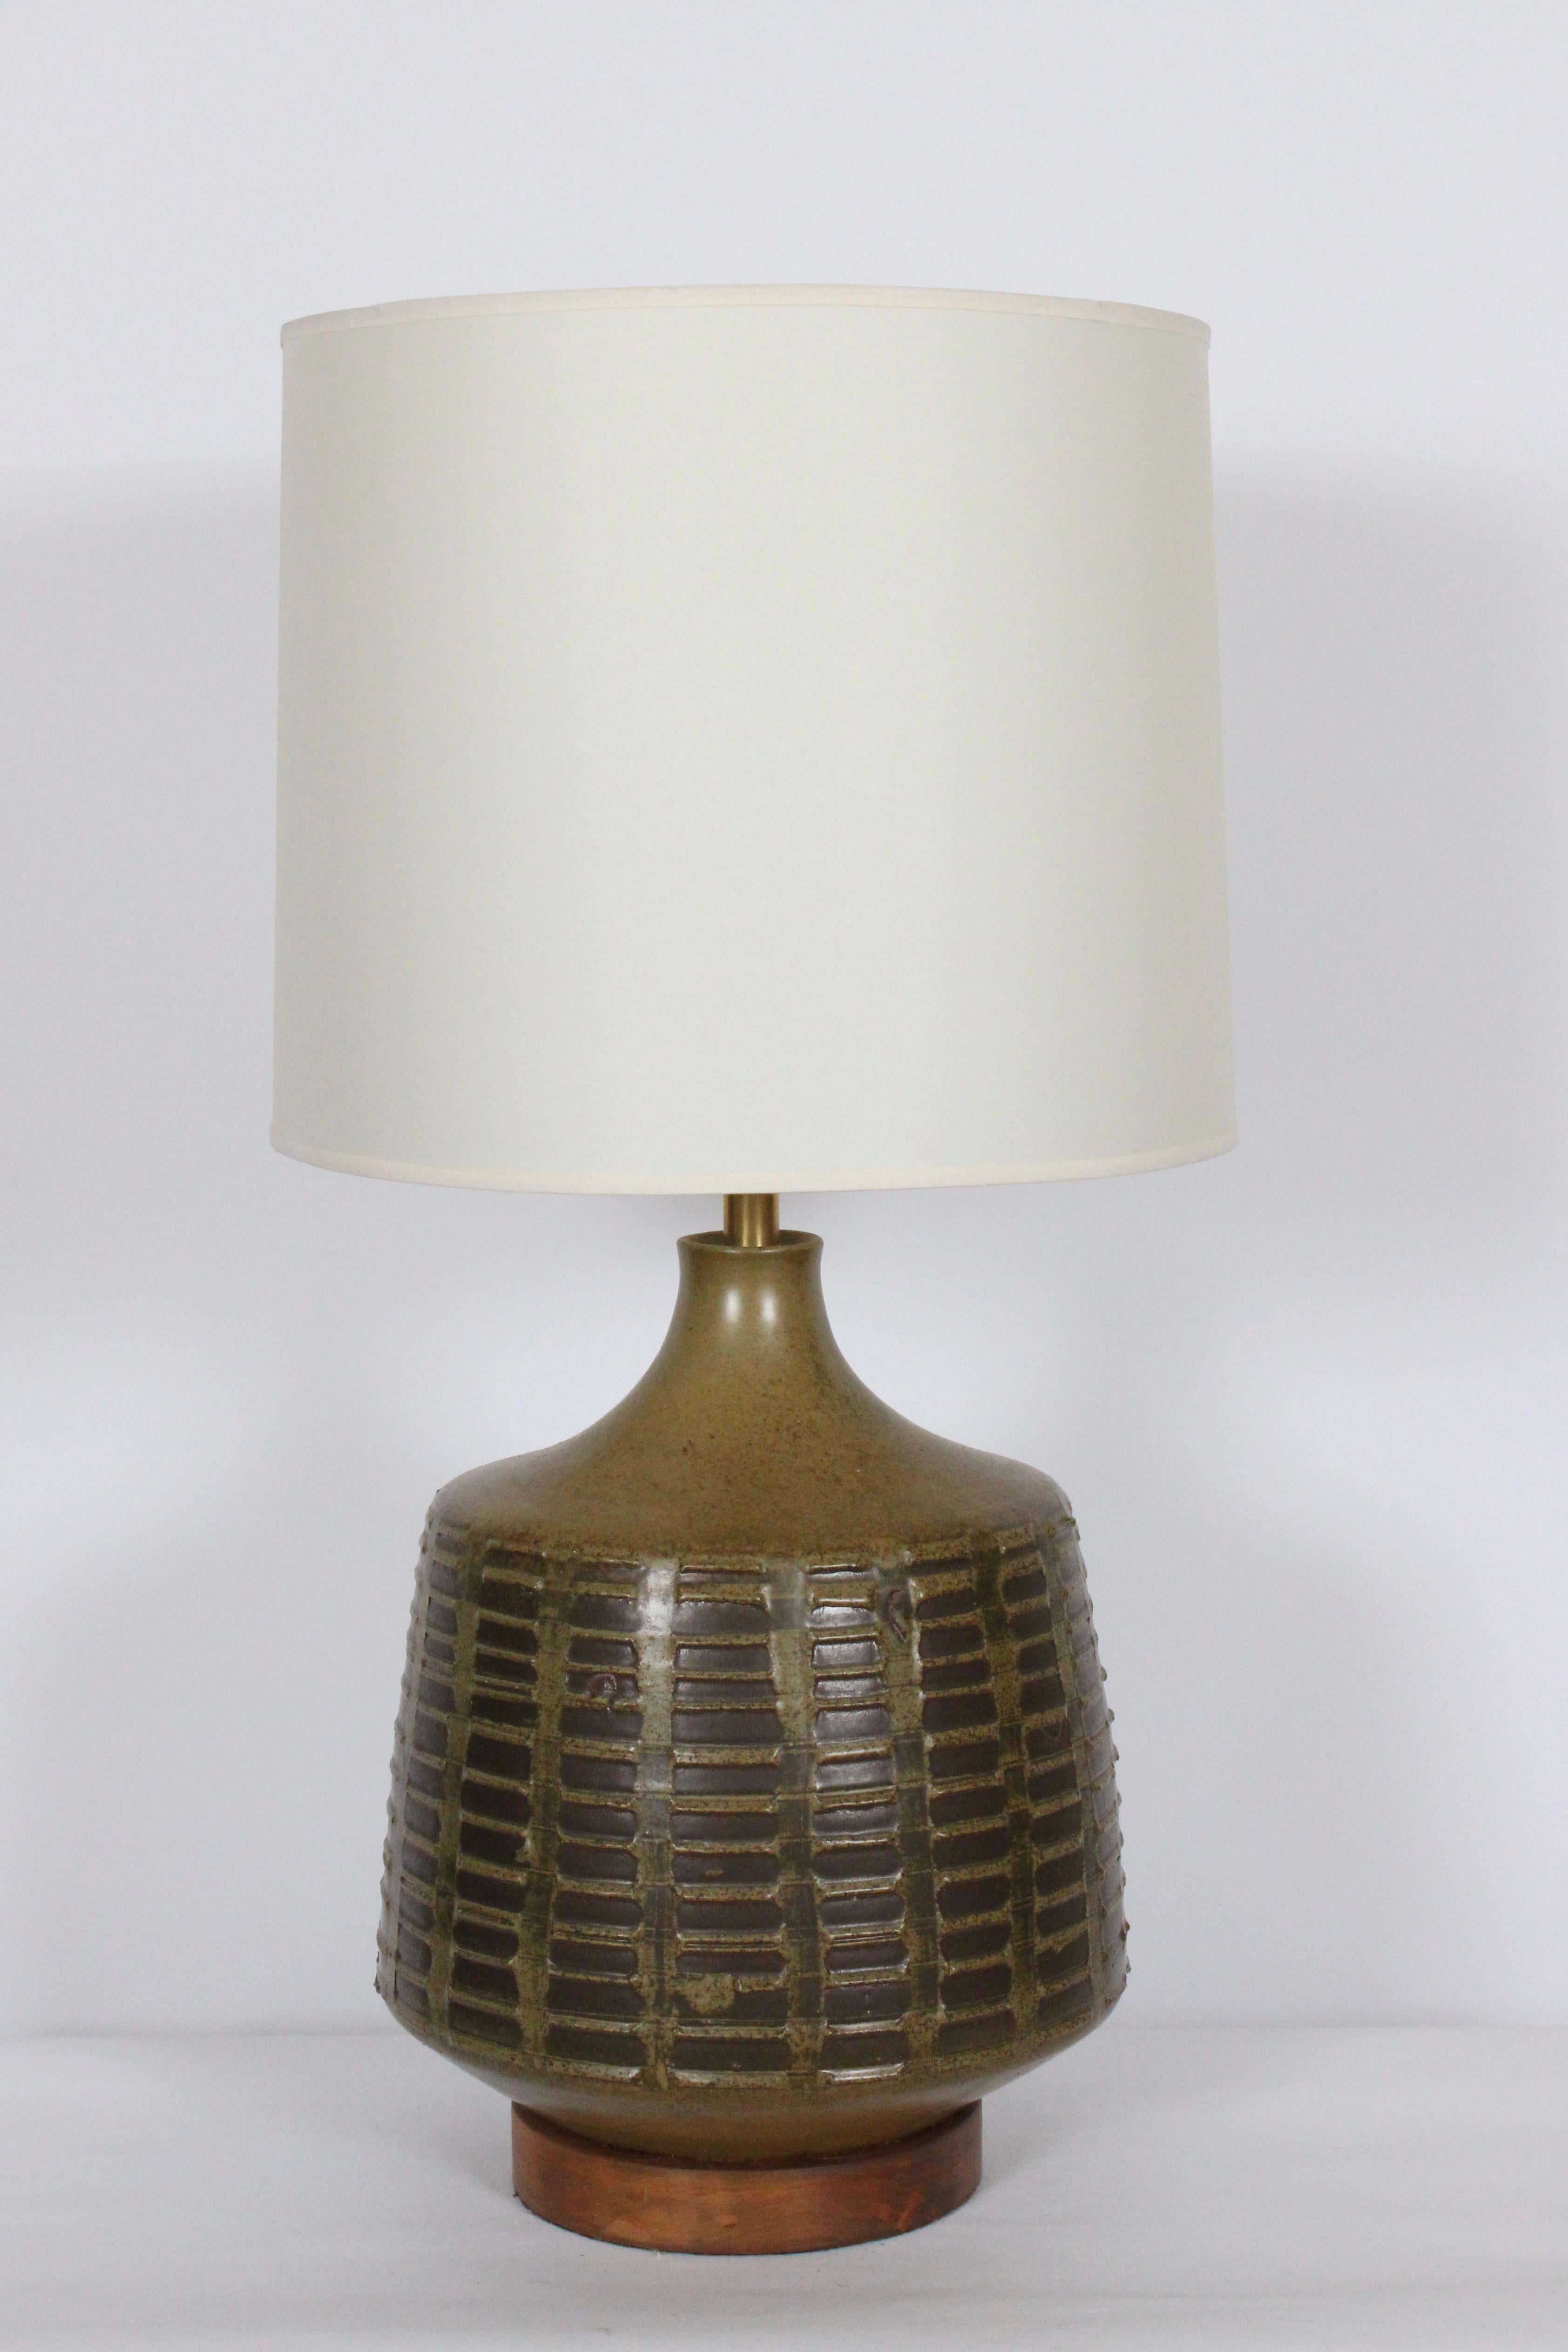 Substantial David Cressey Olive & Cocoa Patterned Art Pottery Table Lamp 3